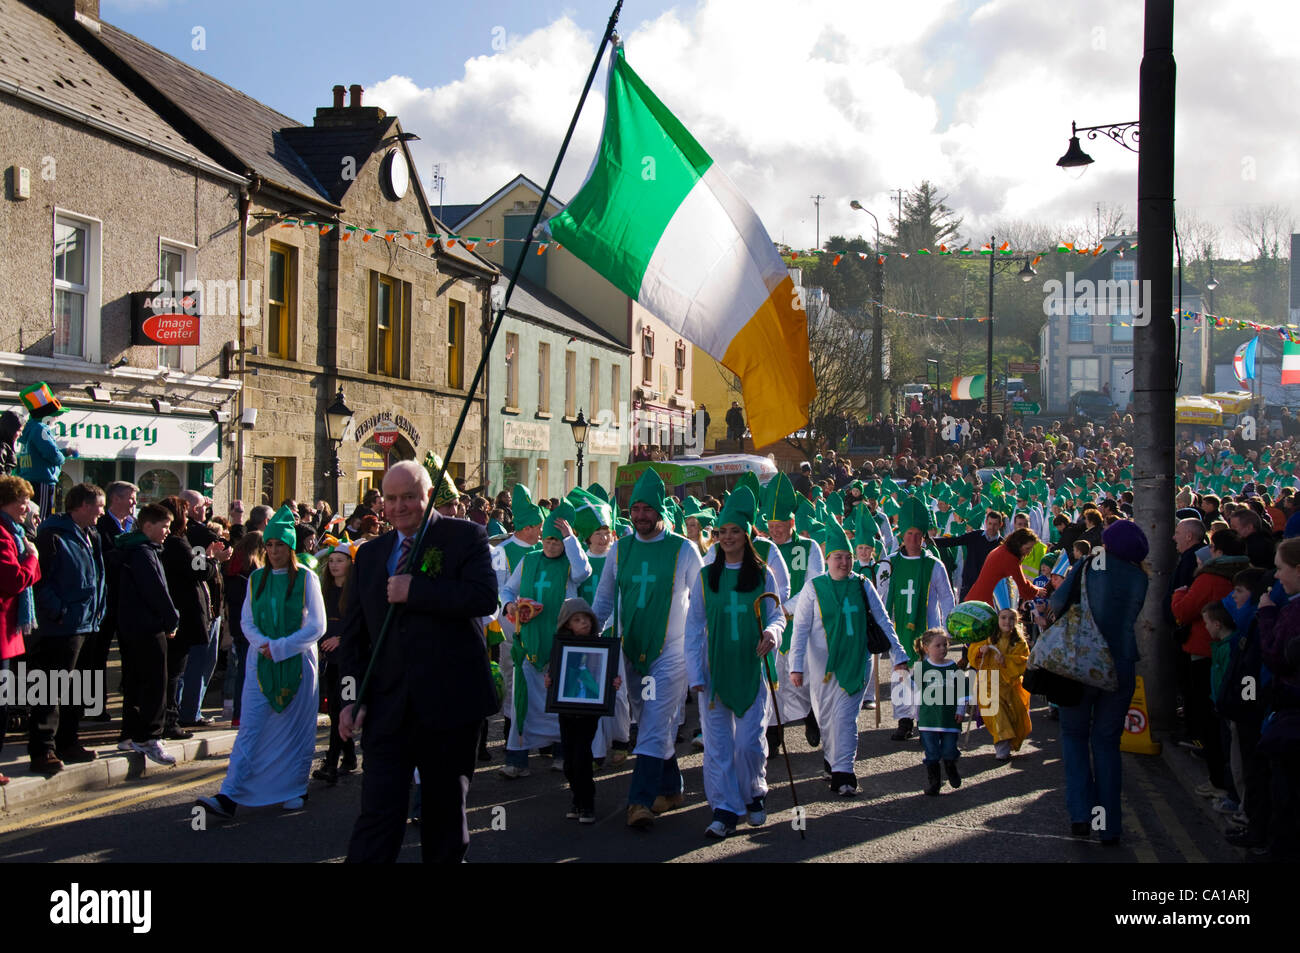 Ardara, County Donegal, Ireland. People in fancy dress set World record for the Guinness Book of Records “Most St. Patricks In One Place At One Time” record on St. Patrick’s weekend parade. Total of 229 St. Patricks. Photo by: Richard Wayman/Alamy Stock Photo